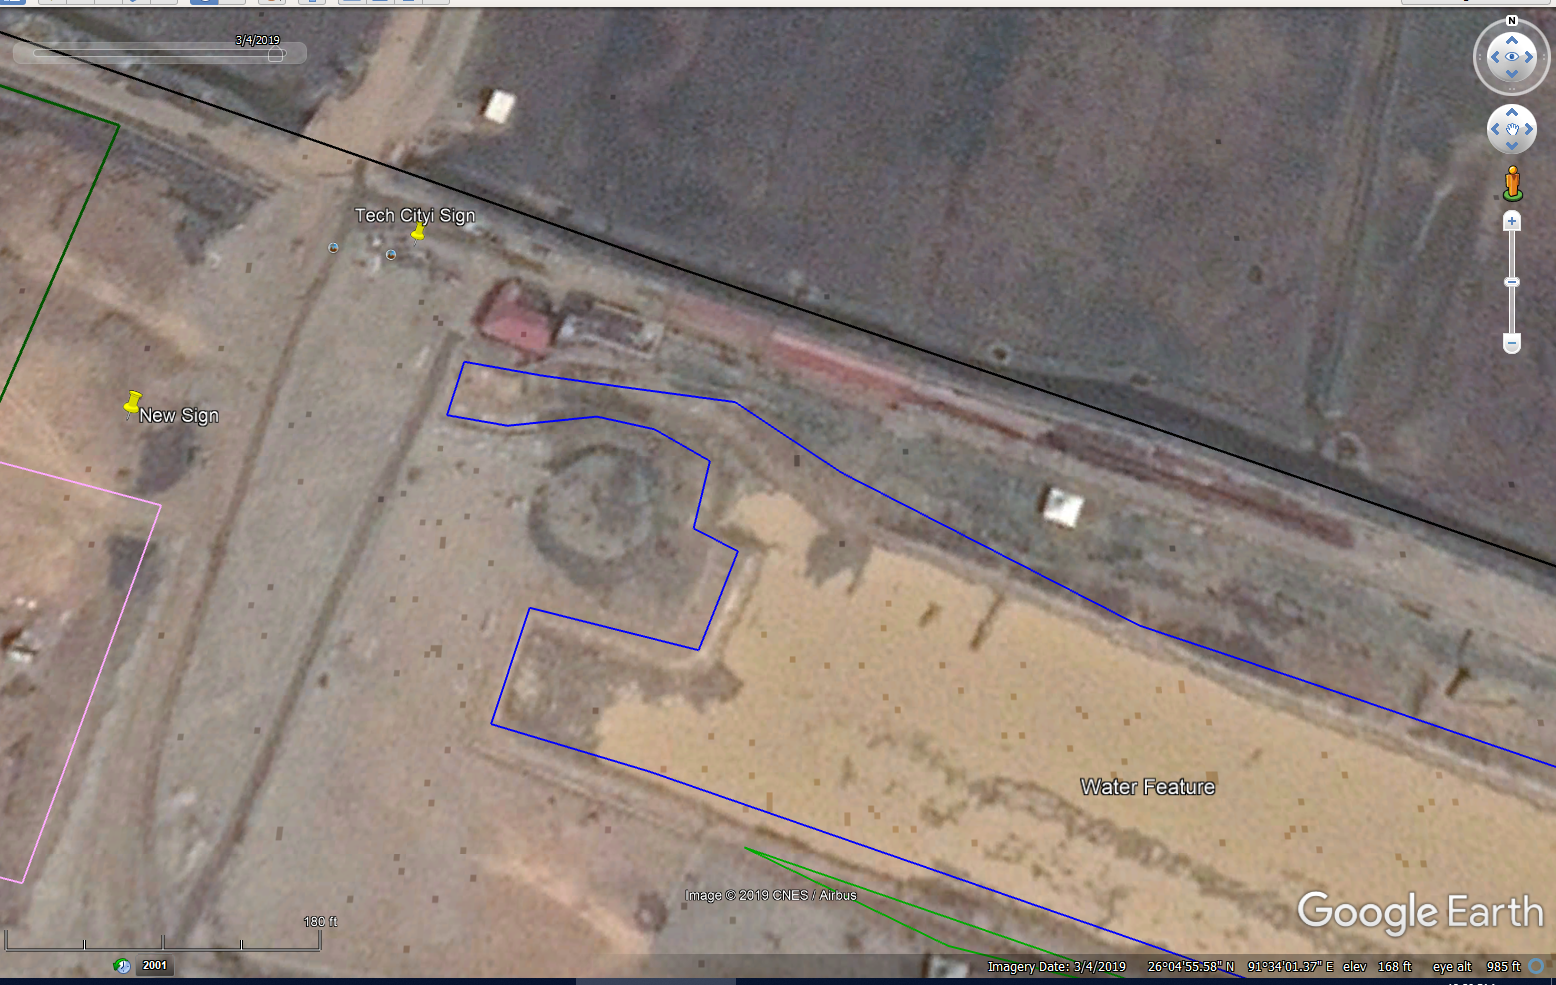 gqhio2019-03-04_Tech_City_Camp_Office_Google_Earth_zoom.png